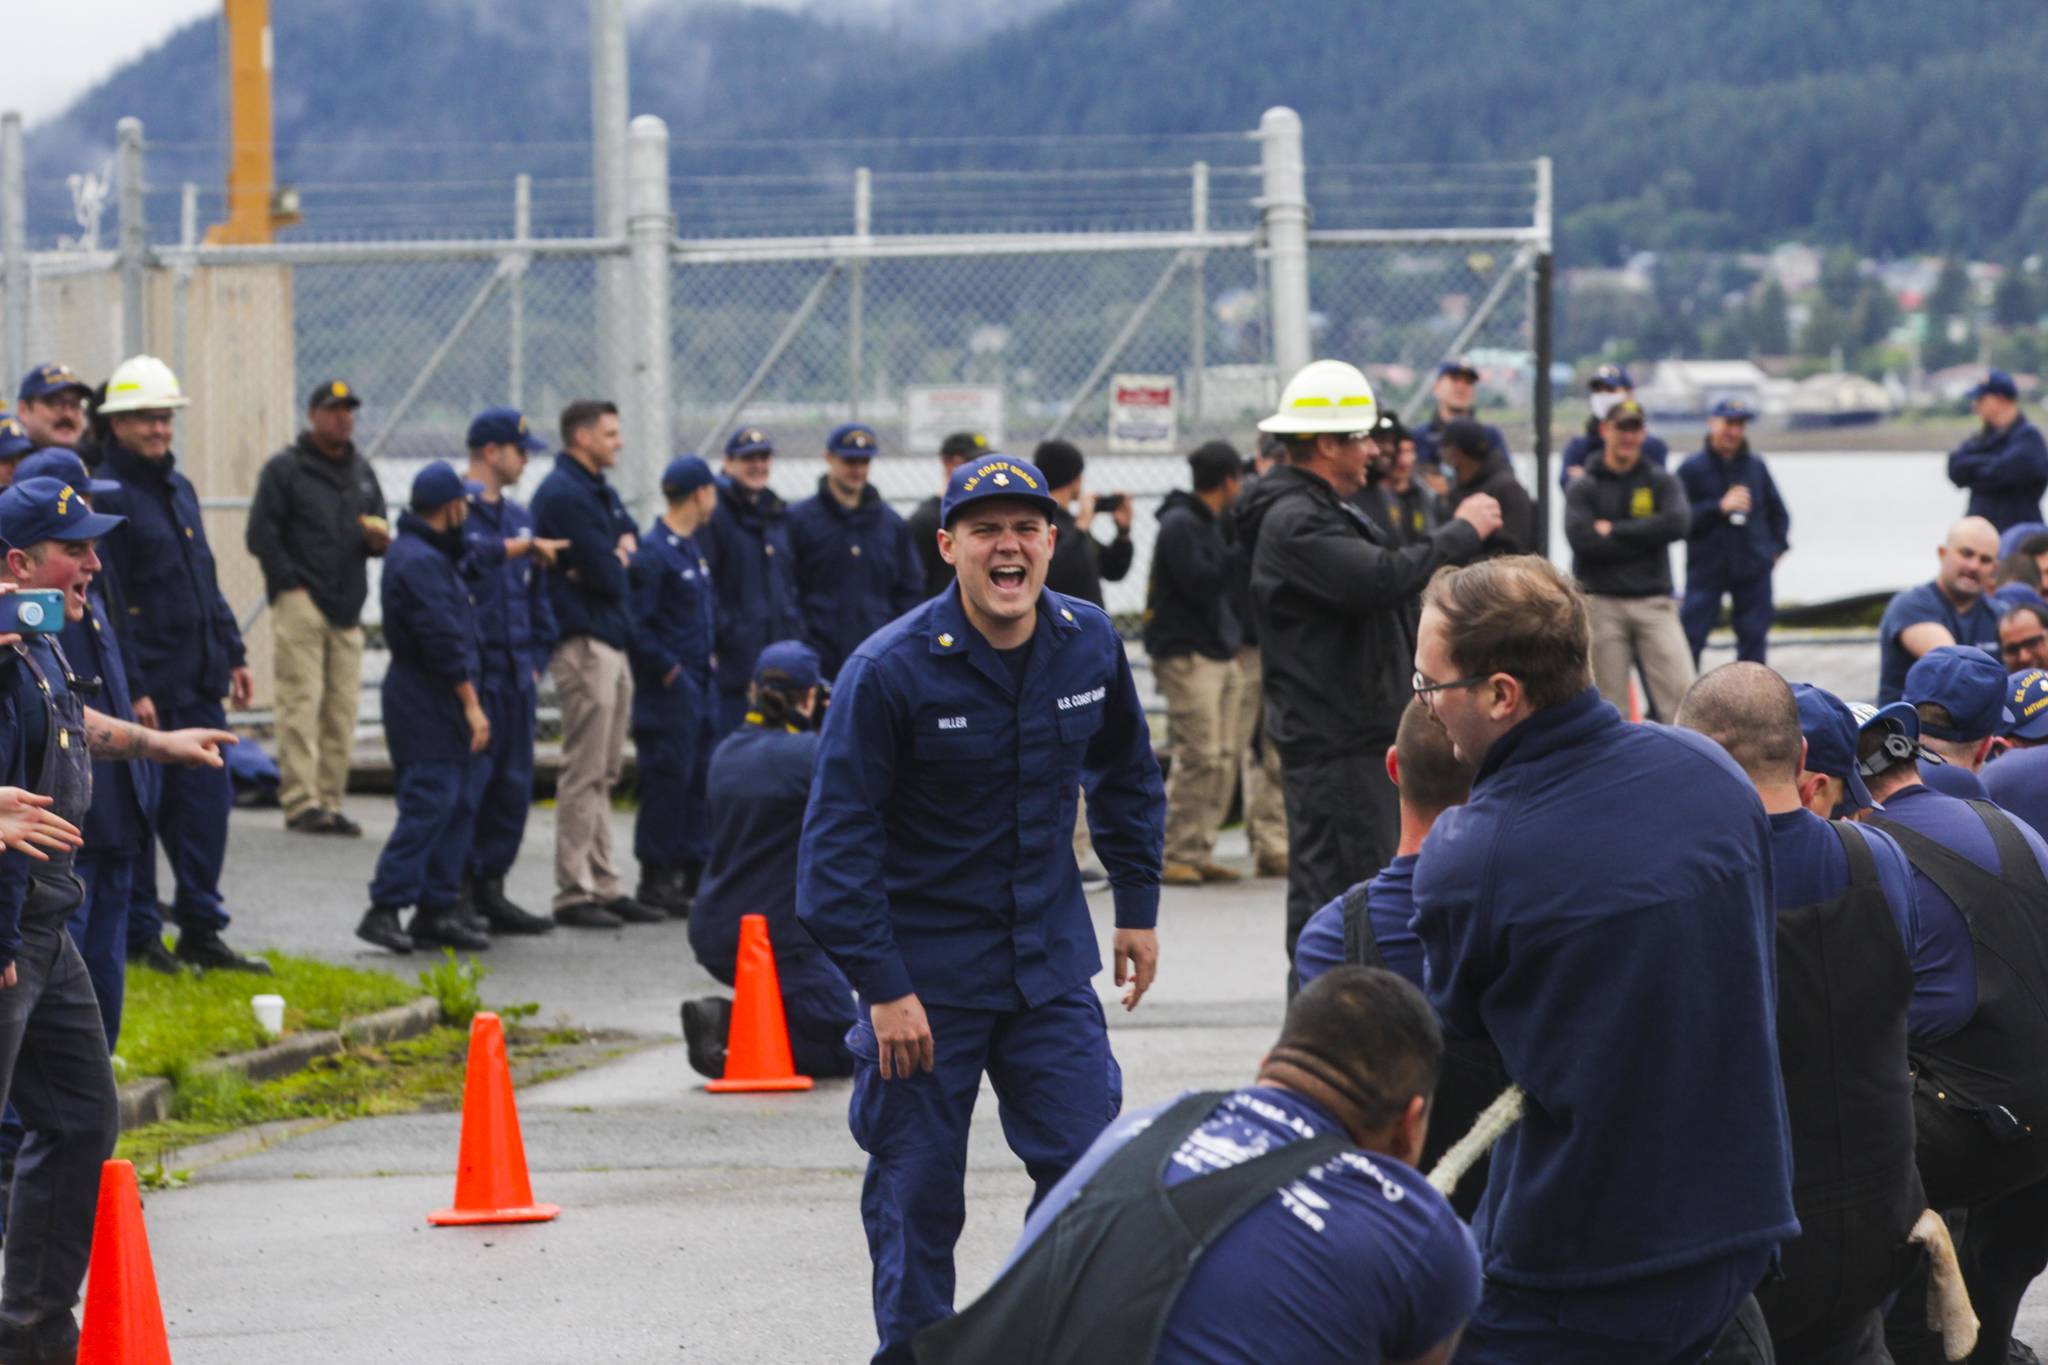 A petty officer exhorts his shipmates during the tug of war, one of the inter-vessel competitions during this year’s Buoy Tender Roundup at Sector Juneau, on Wednesday, Aug. 25, 2021. (Michael S. Lockett / Juneau Empire)